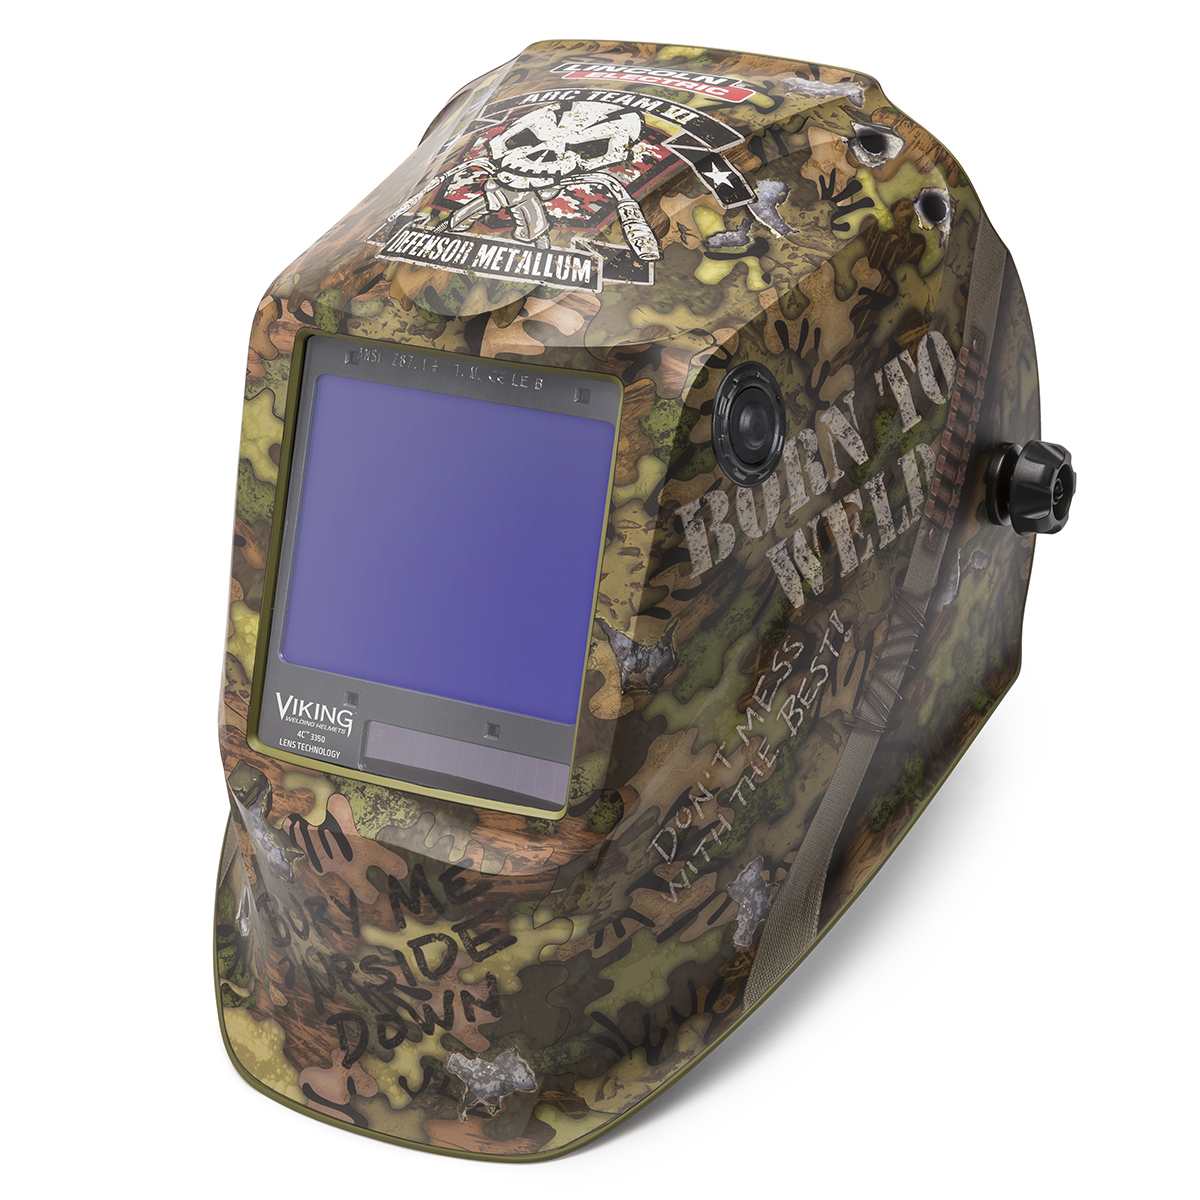 Lincoln Electric® VIKING® 3350 Camouflage Welding Helmet With Variable Shades 5 - 13 Auto Darkening Lens, 4C® Lens Technology An